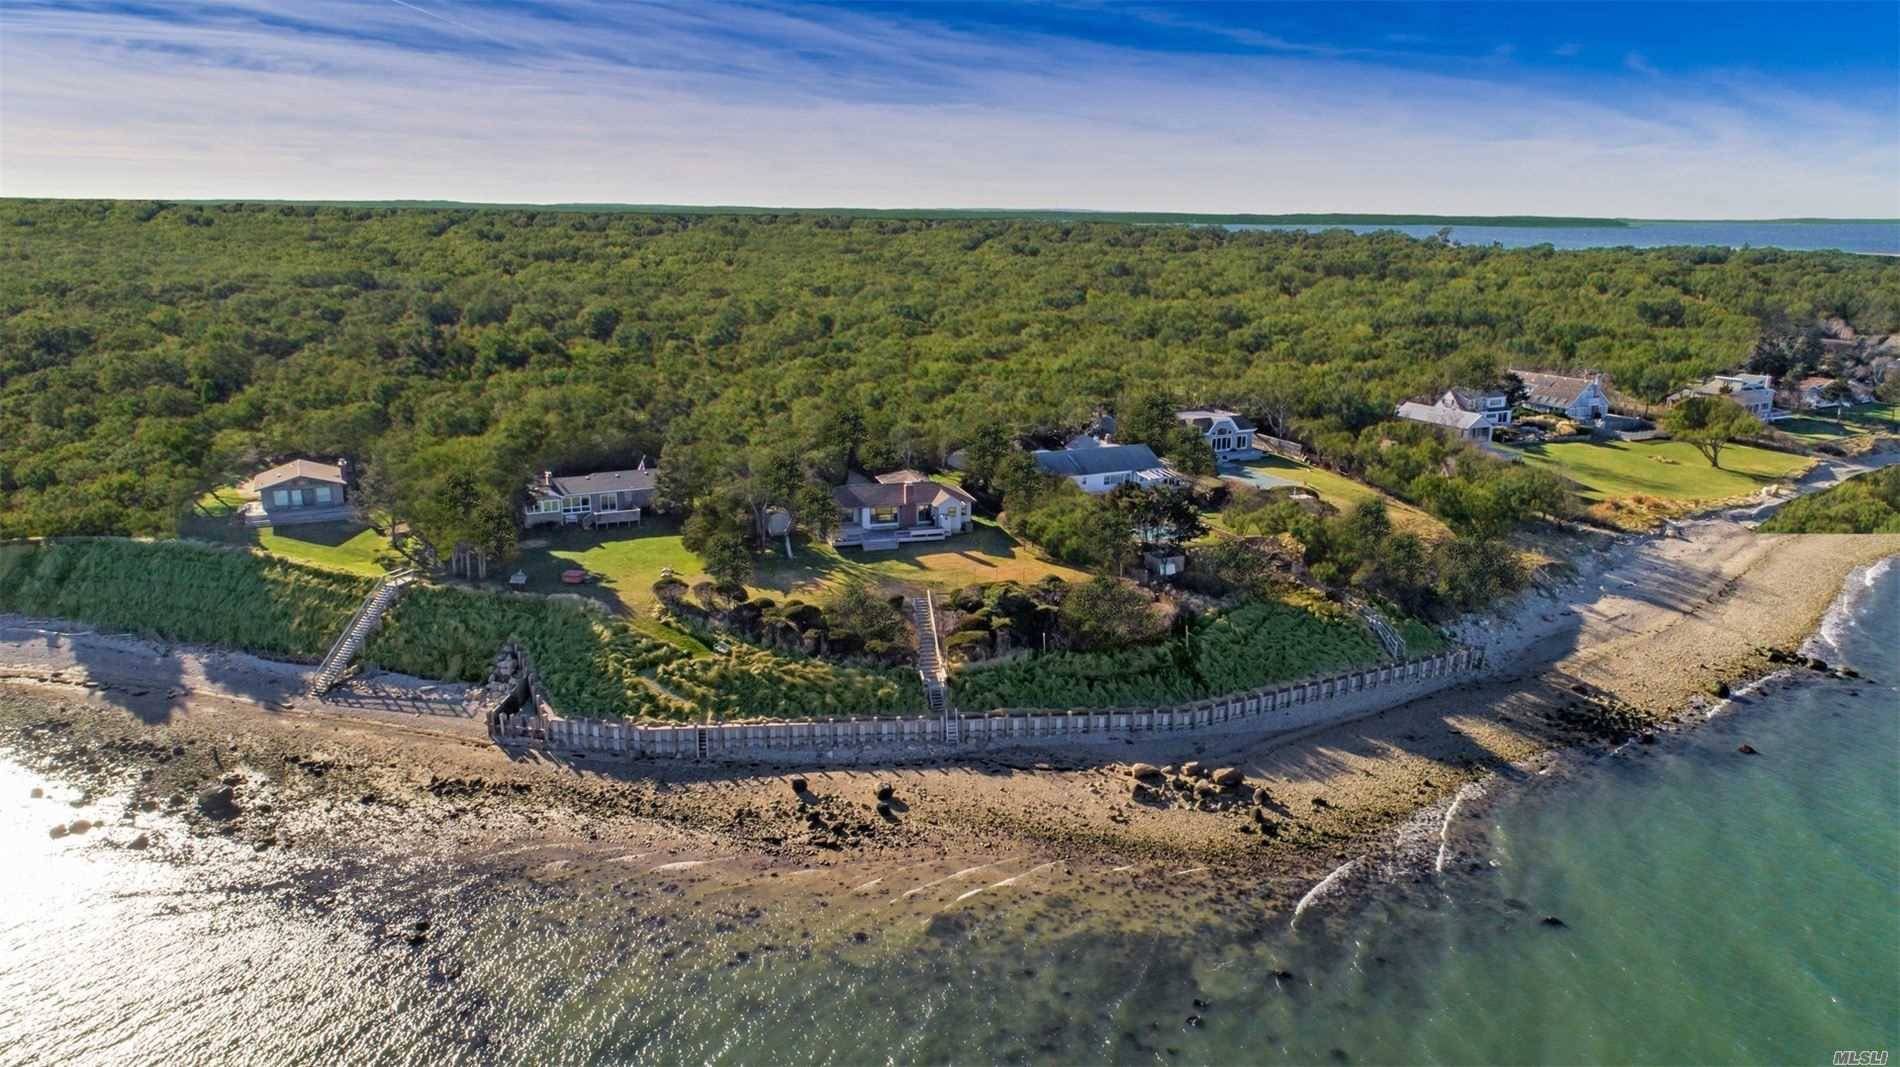 Available for the first time in over three decades, this exclusive, waterfront Kings Point property in East Hampton features views of Gardiner's Bay and Island.